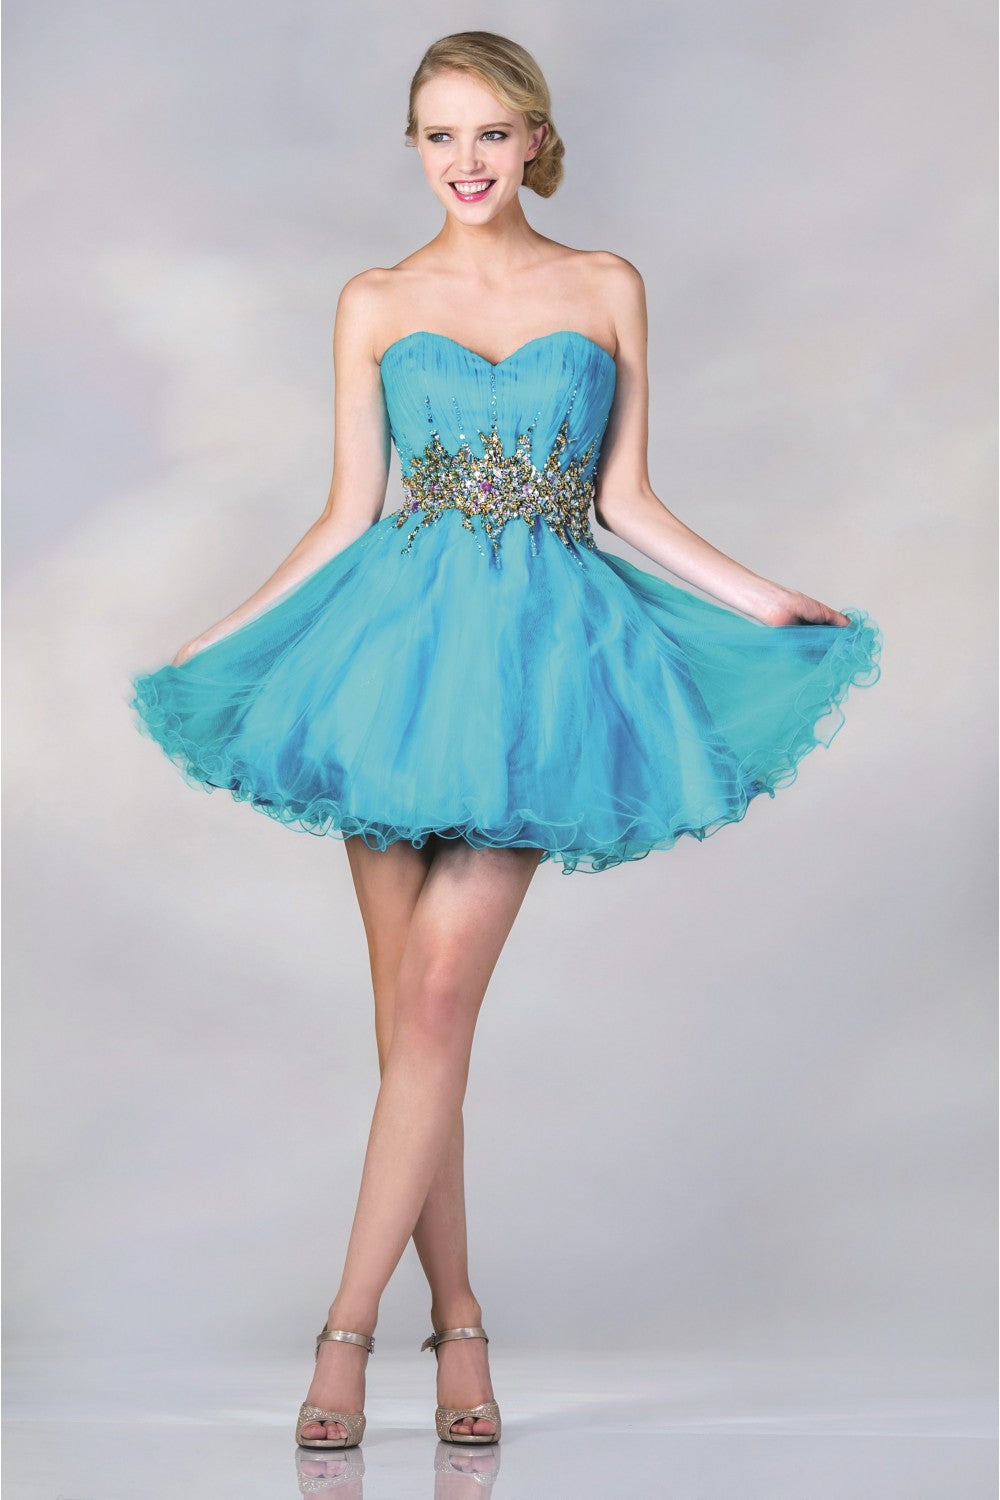 Beaded Strapless Sleeveless Sweetheart Bodice Tulle Short Prom & Homecoming Dress Accented with Jewel Embellished Waistline CDJC870 Elsy Style Homecoming Dress